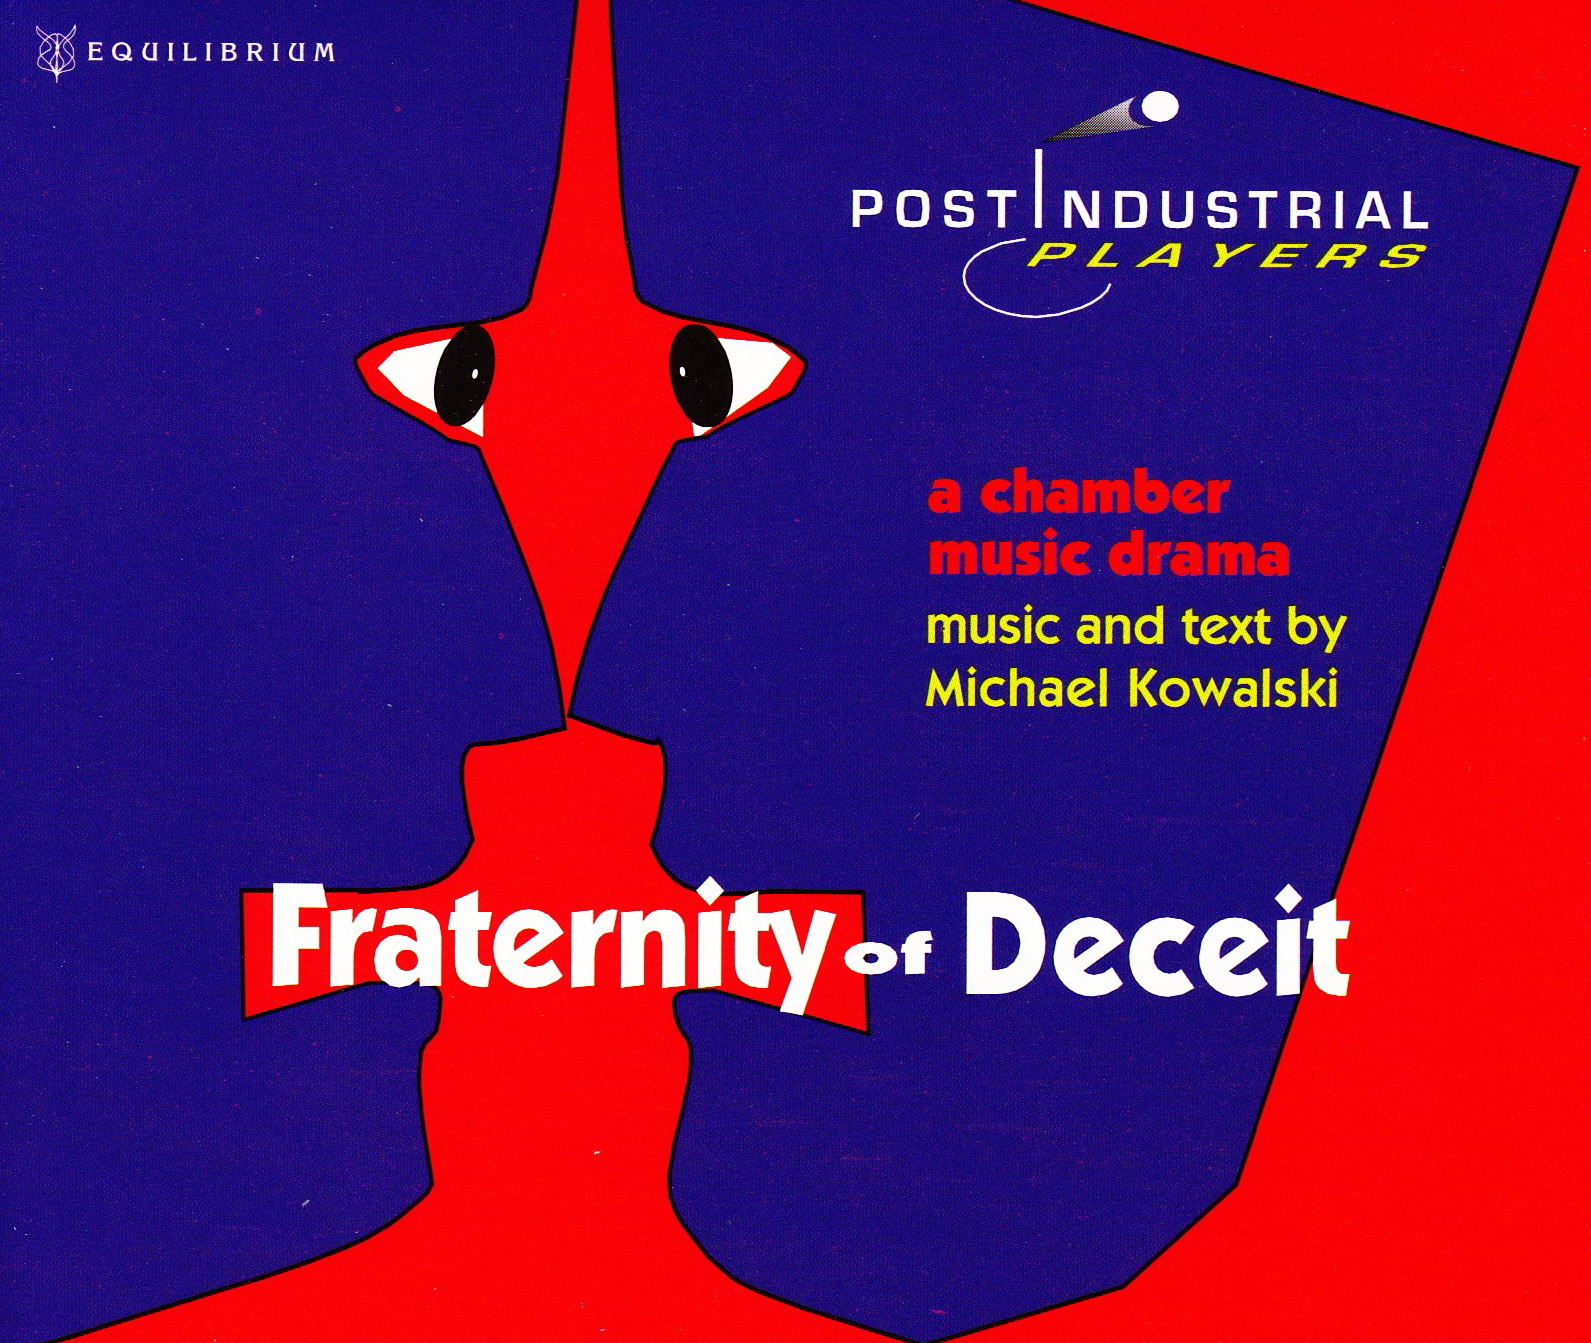 Fraternity of Deceit